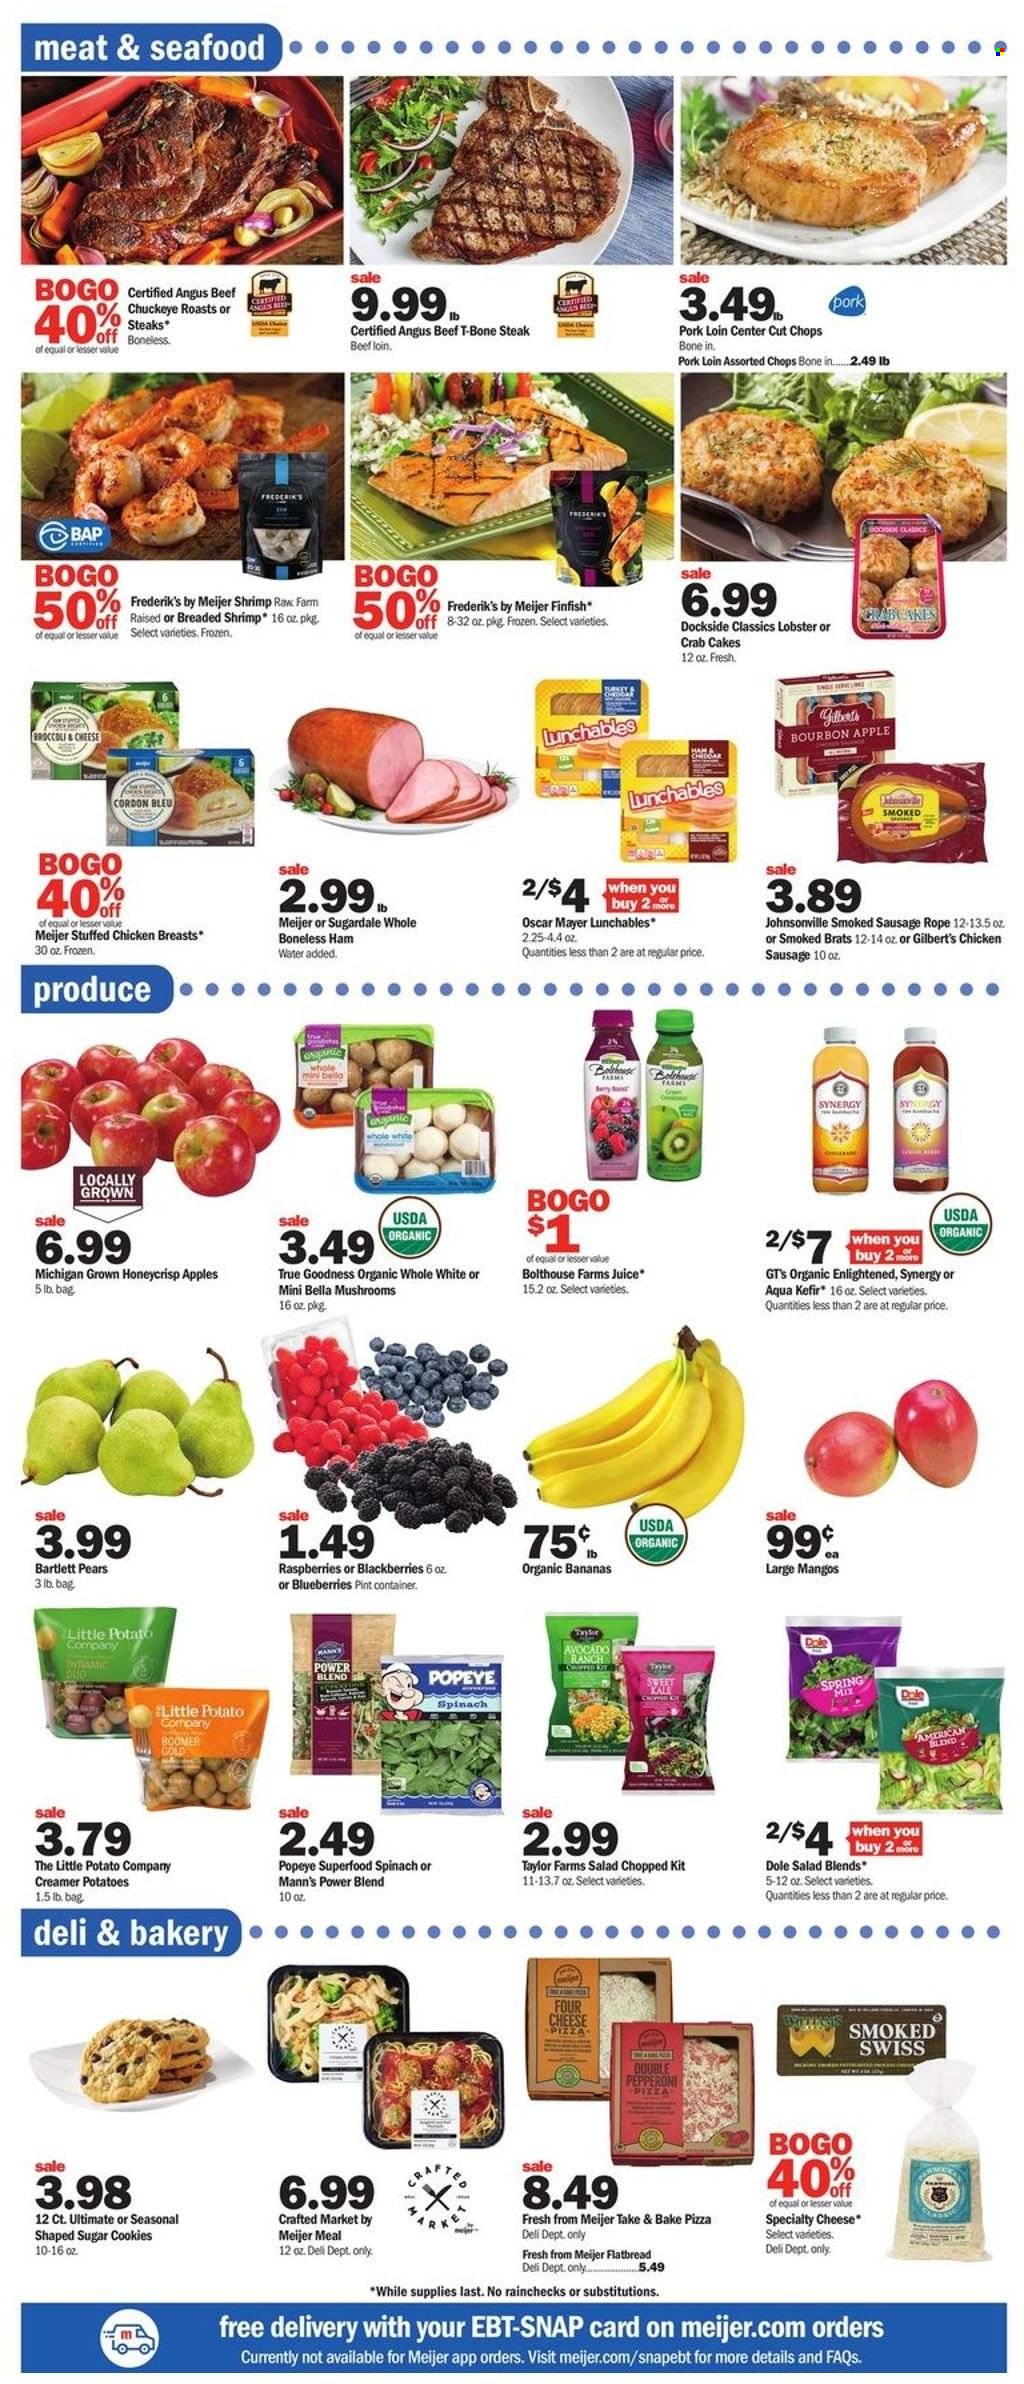 thumbnail - Meijer Flyer - 11/27/2022 - 12/03/2022 - Sales products - flatbread, broccoli, potatoes, salad, Dole, apples, avocado, bananas, Bartlett pears, blackberries, blueberries, pears, organic bananas, lobster, seafood, shrimps, crab cake, pizza, Lunchables, stuffed chicken, Sugardale, ham, Johnsonville, Oscar Mayer, sausage, smoked sausage, pepperoni, chicken sausage, Gilbert’s, kefir, Enlightened lce Cream, cordon bleu, cookies, juice, beef meat, t-bone steak, steak, pork loin, pork meat, container. Page 2.